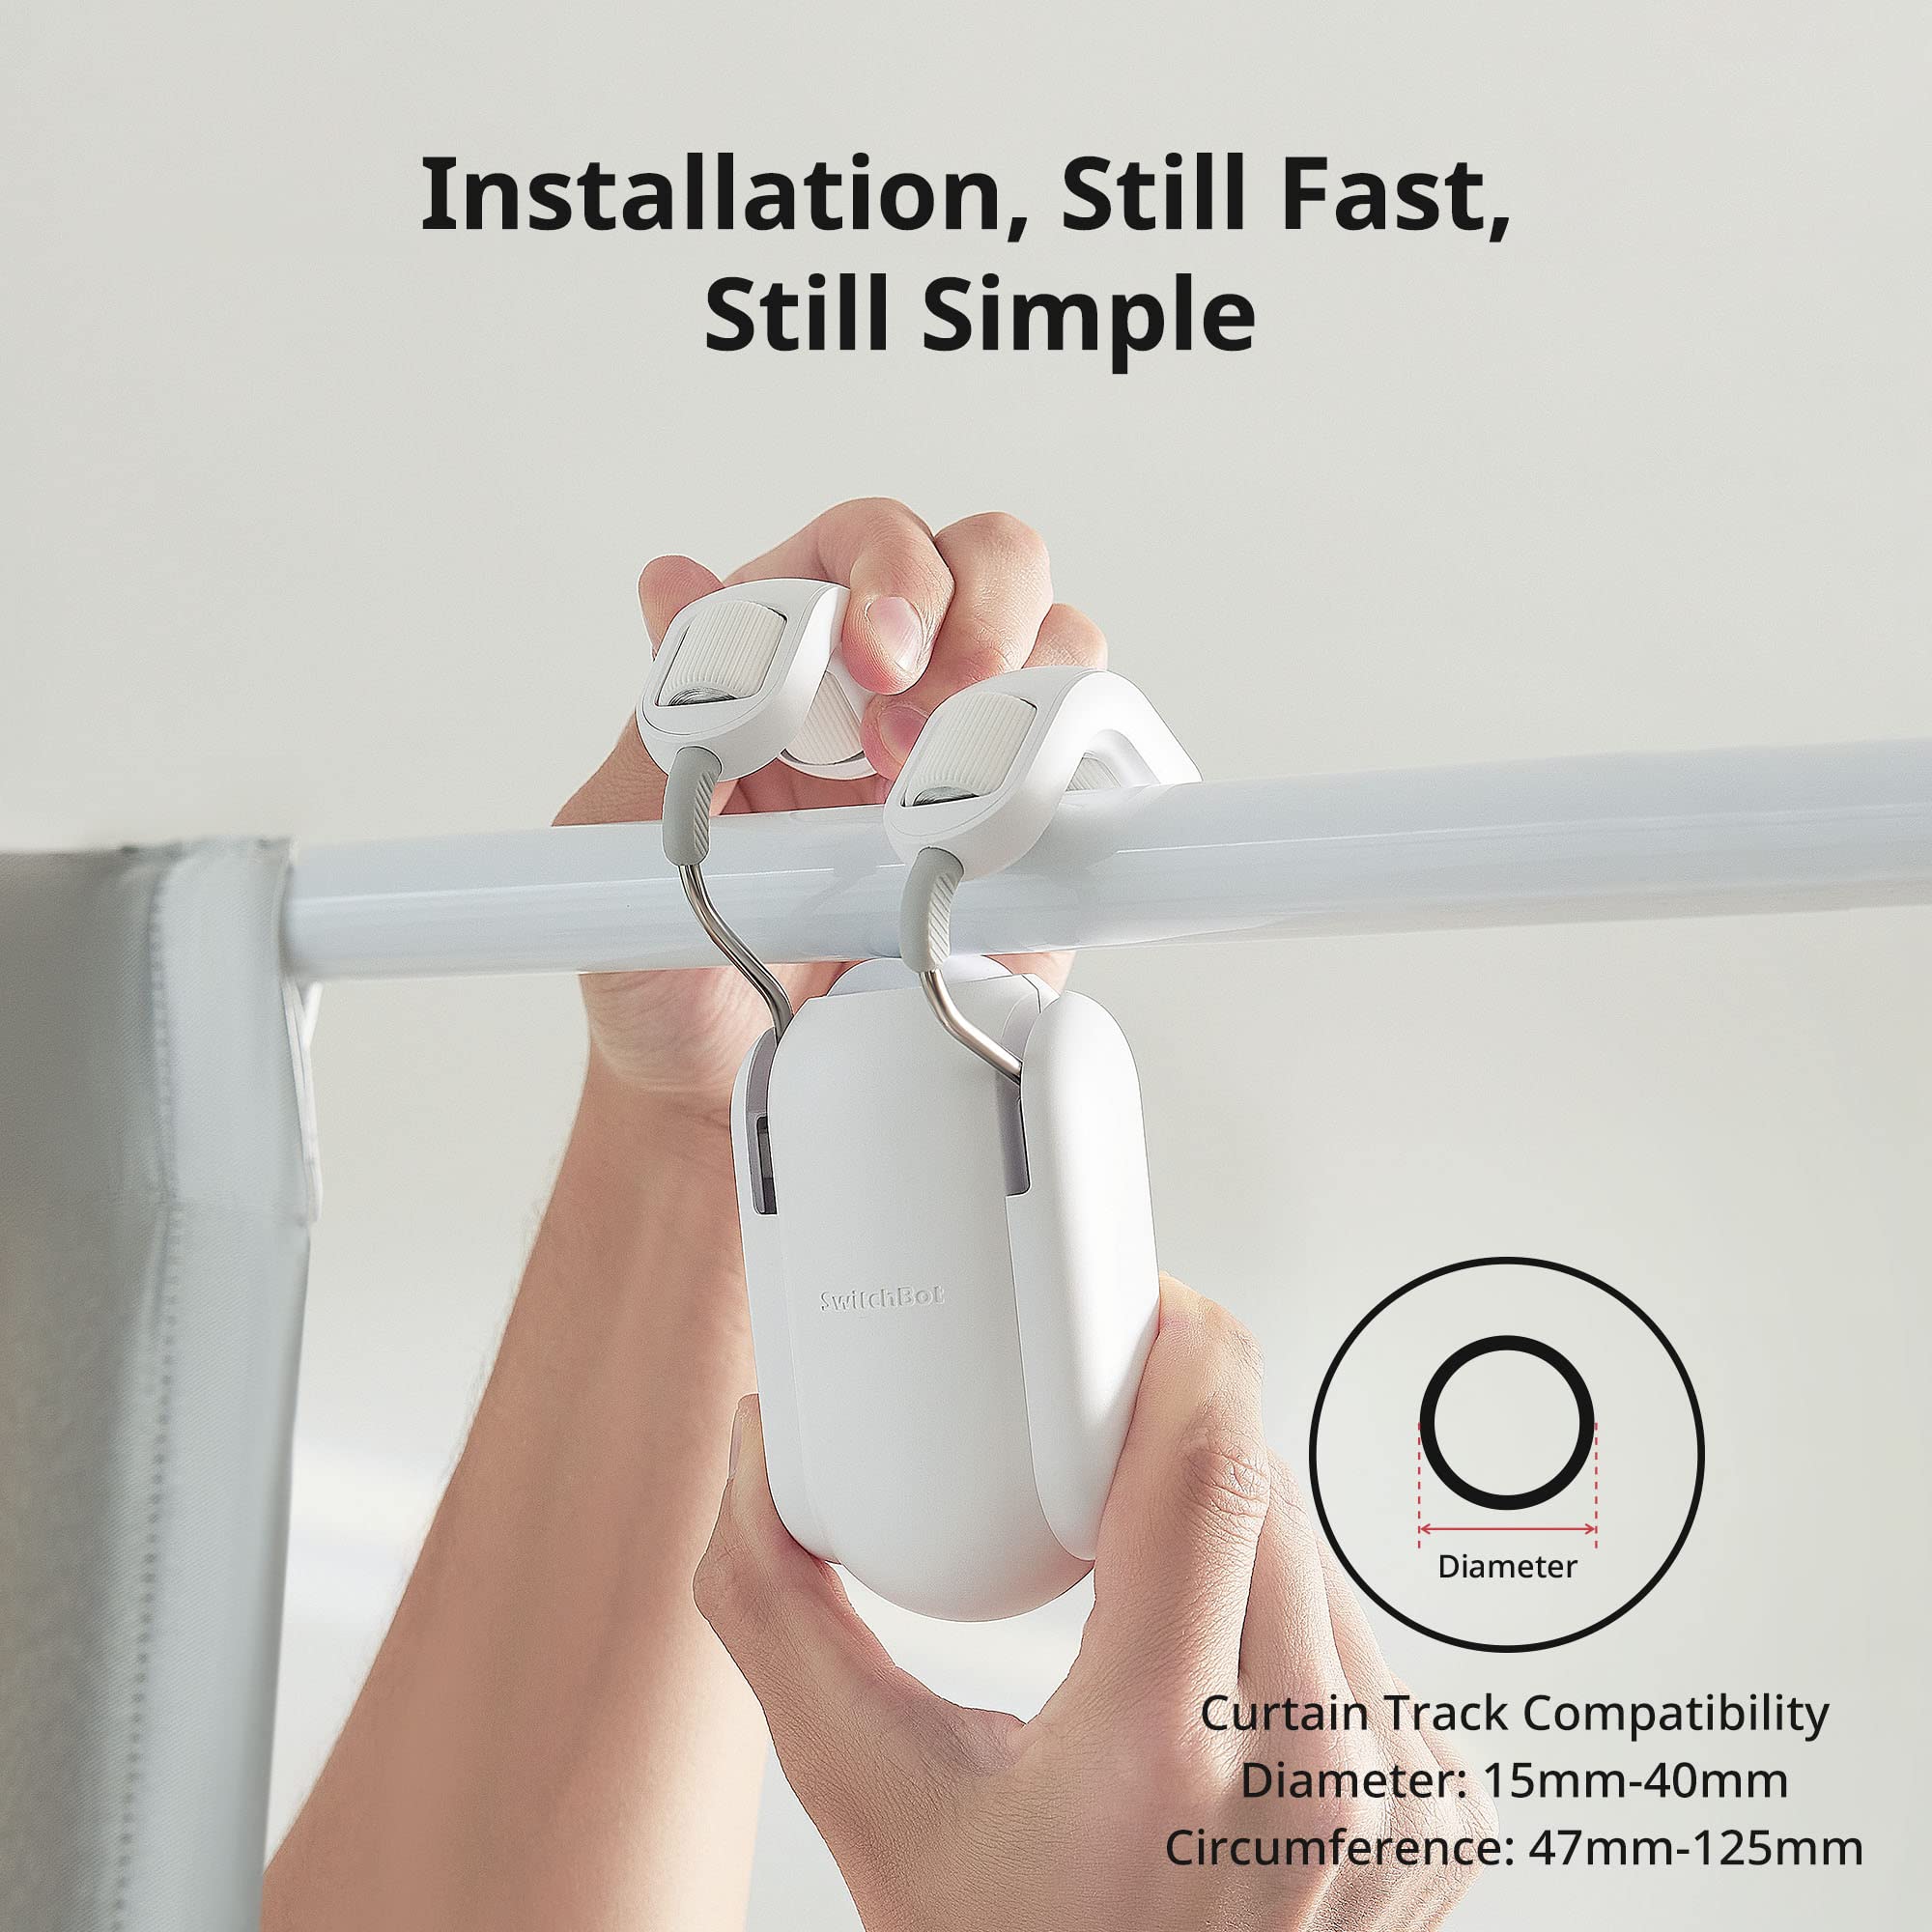 [Upgraded Version] SwitchBot Curtain Smart Electric Motor - Wireless App Automate Timer Control, Add SwitchBot Hub to Make it Compatible with Alexa, Google Home, IFTTT (Rod2.0 Version, White)